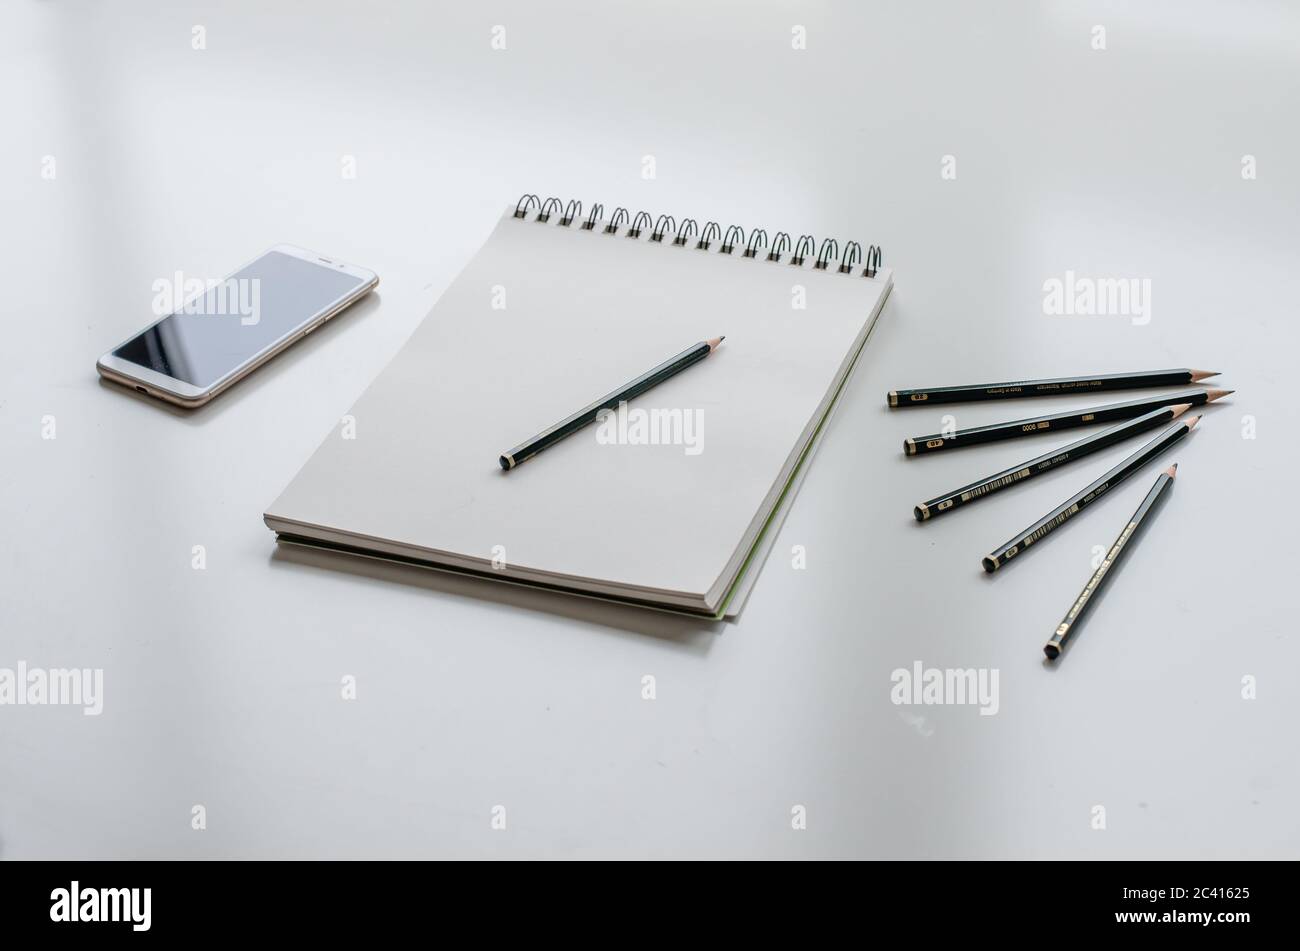 Sketchpad with a pencil. A cell phone and five pencils on a white desk. Stock Photo